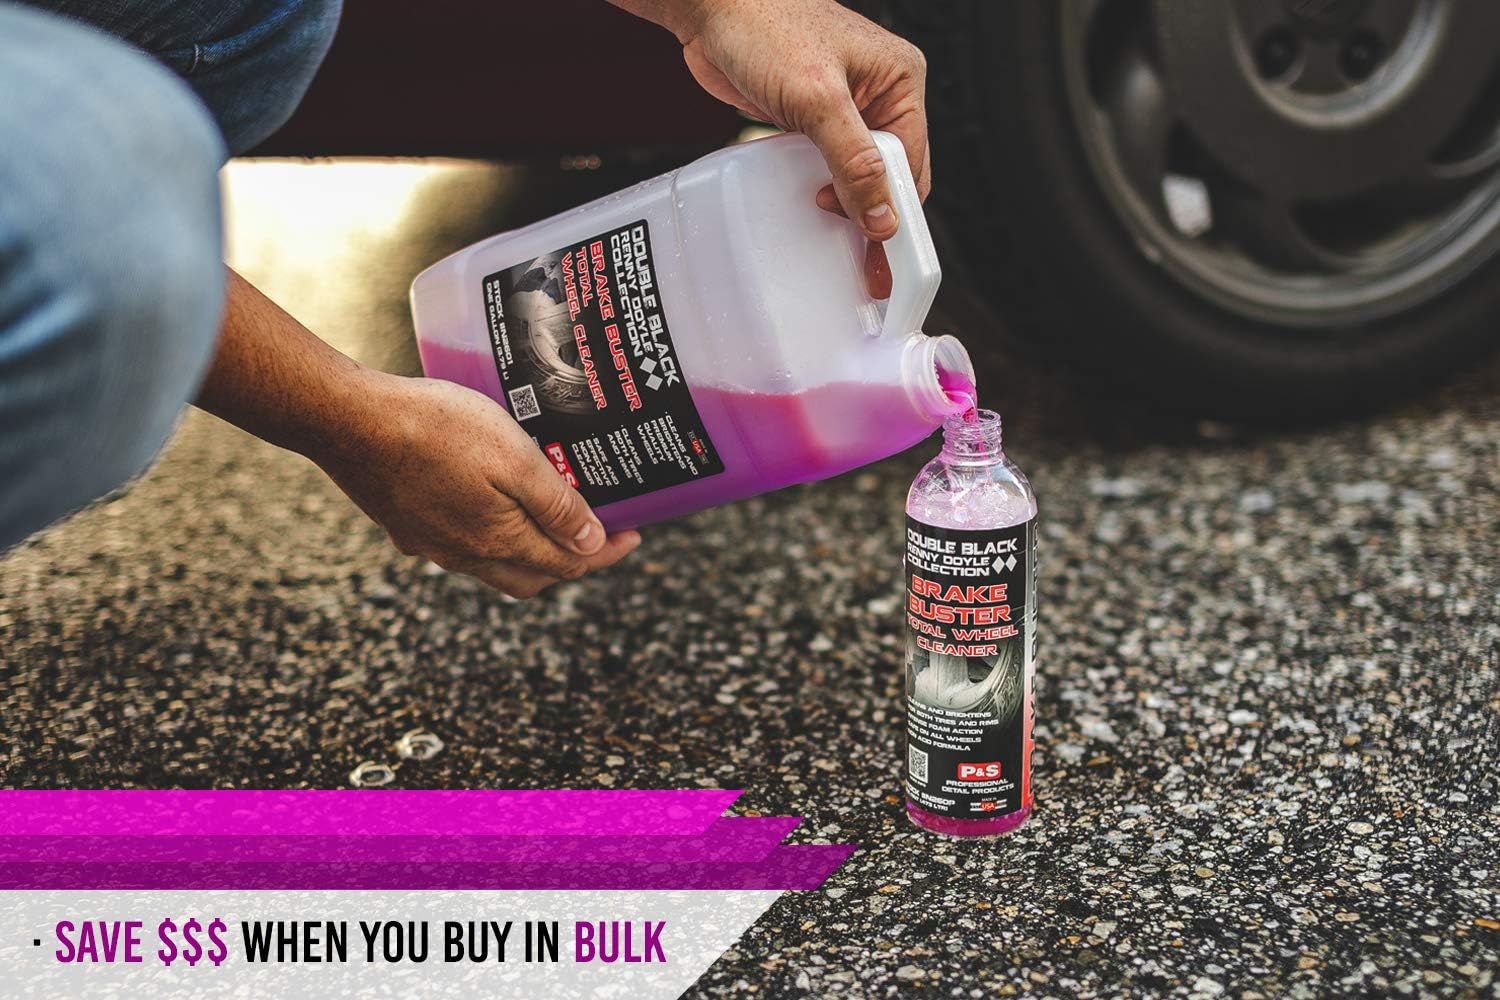 Applying P&S Brake Buster Total Wheel Cleaner on a car wheel, showing the product in action removing dirt and brake dust.